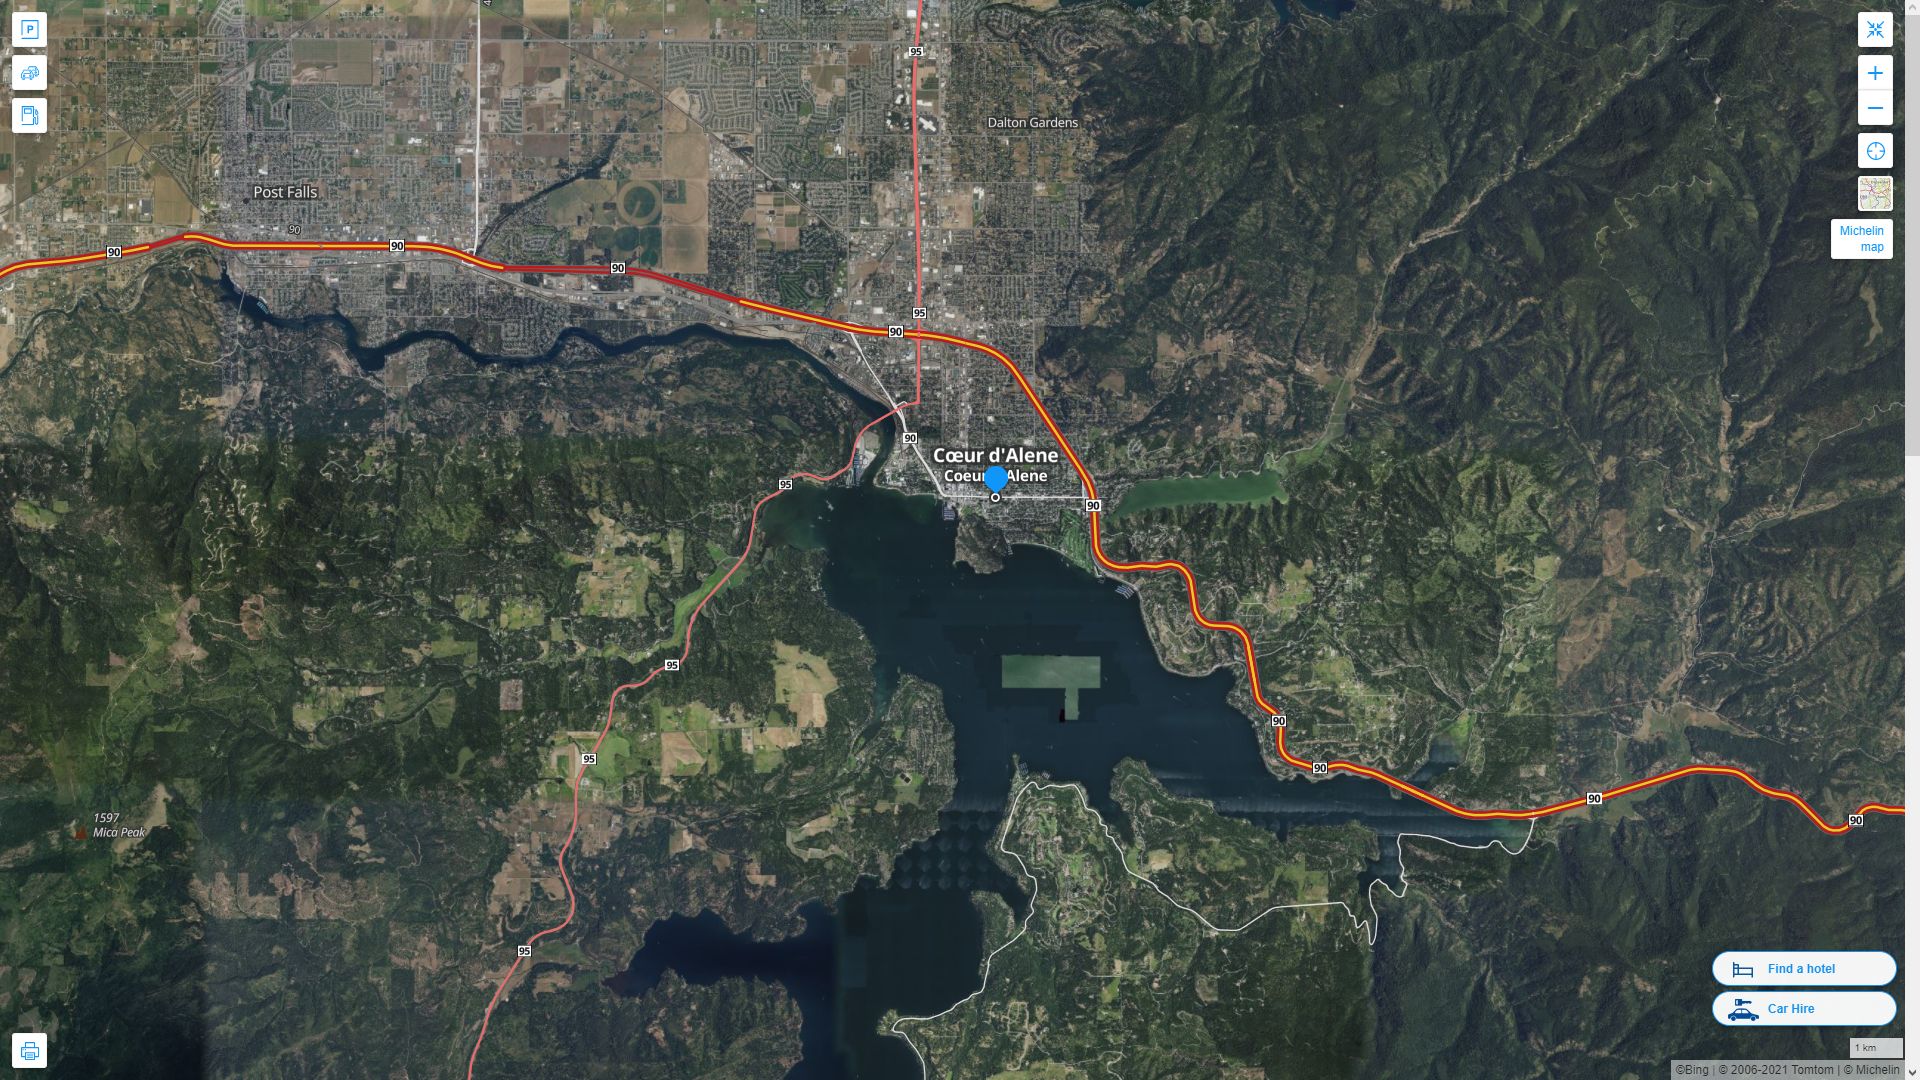 Coeur d'Alene idaho Highway and Road Map with Satellite View